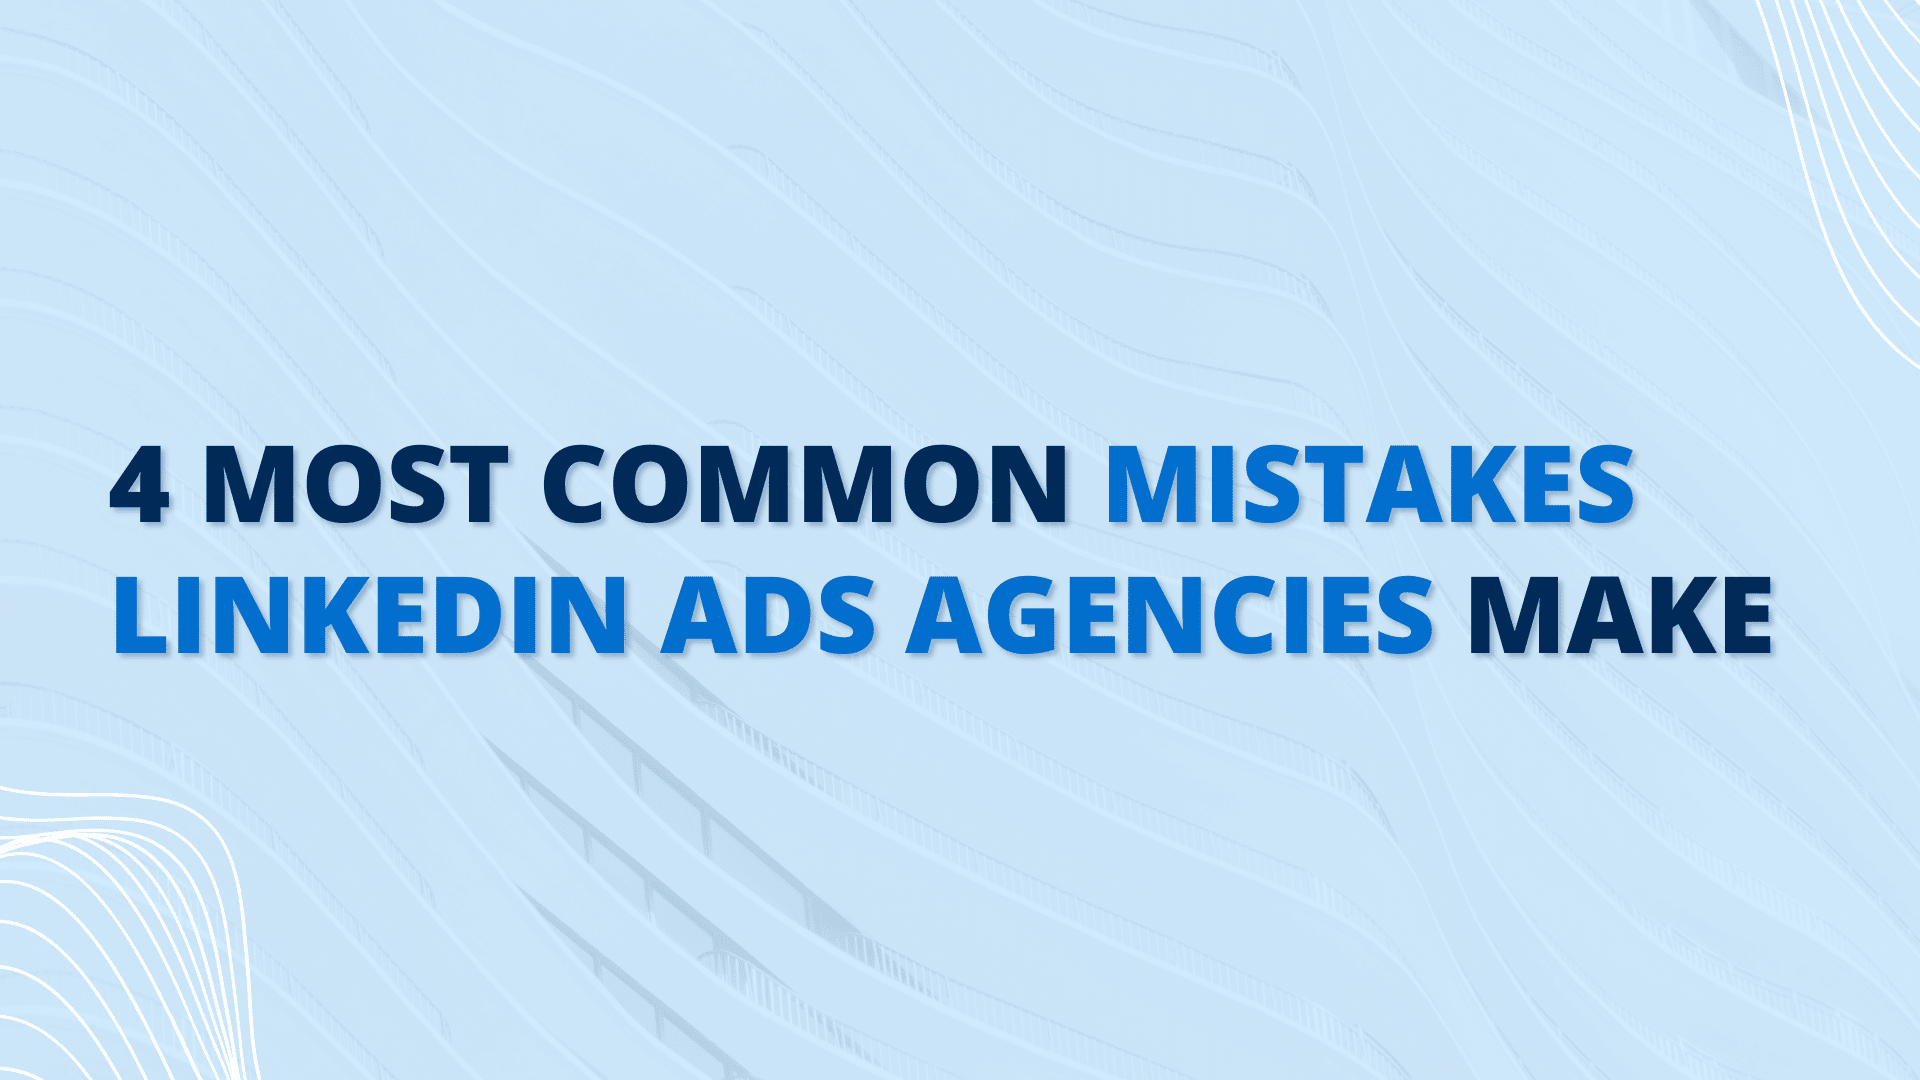 4 Most Common Mistakes LinkedIn Ads Agencies Make